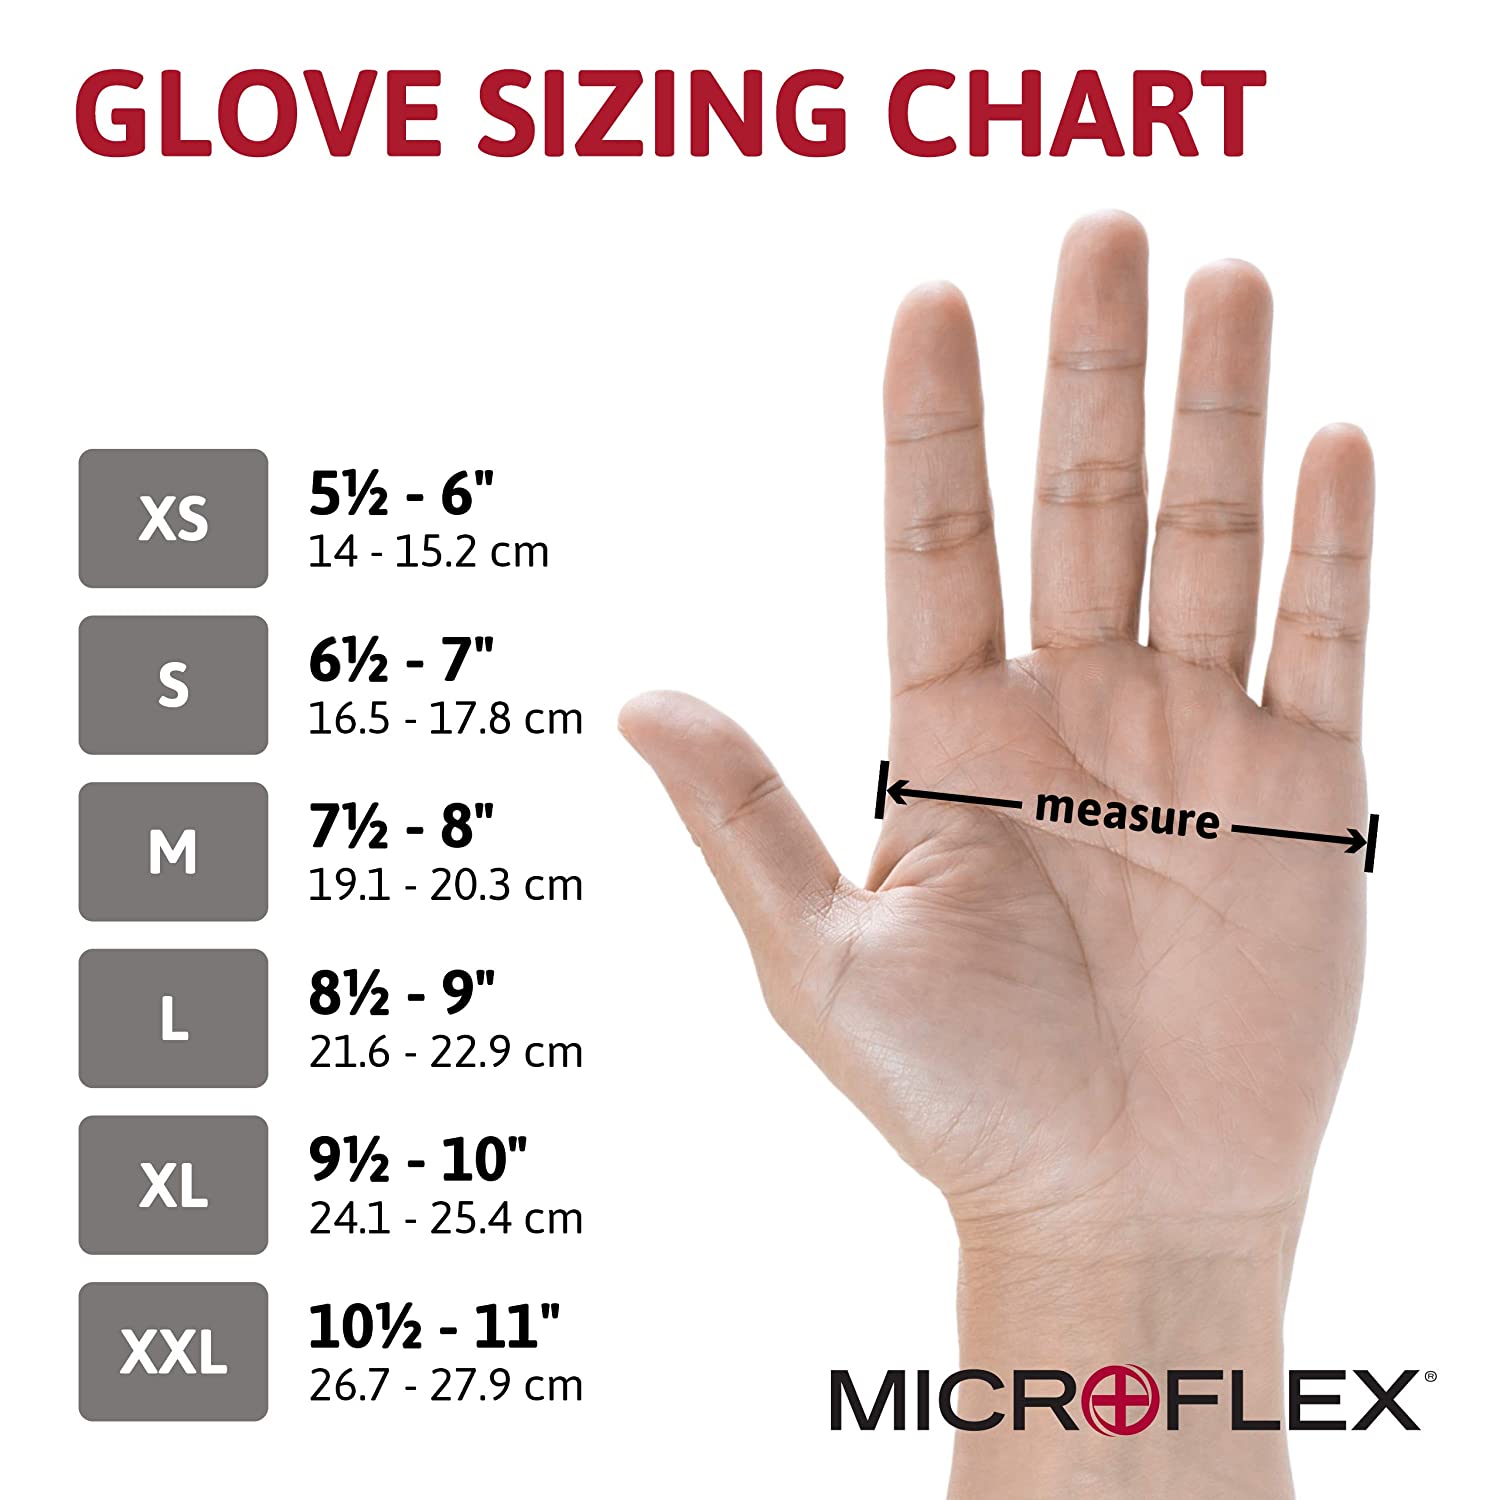 Microflex Diamond Grip MF-300 Disposable Gloves in Latex Multi-Purpose, Powder Free Glove in Natural Rubber for Exam, Cleaning or Mechanic Tasks, White, Size Medium, Box of 100 Units - MPR To